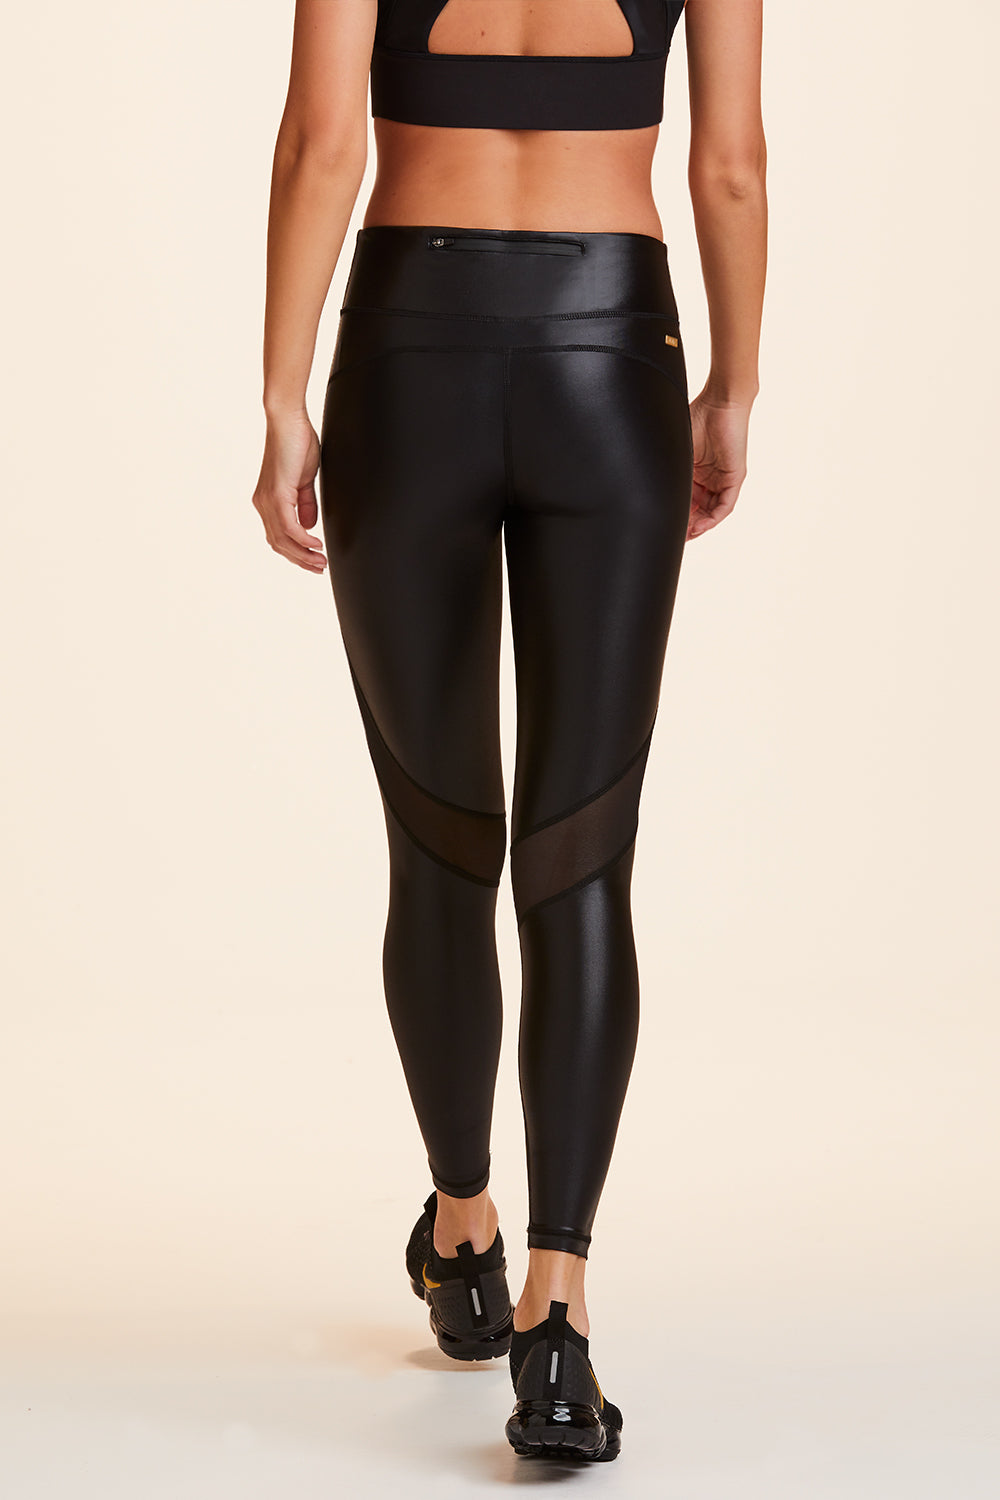 Buy Faux Leather Compression Leggings, Women's Athleisure Leggings Standard  & Plus Size S-3X High Rise Wide Waist Activewear Yoga Pants W Pocket Online  in India 